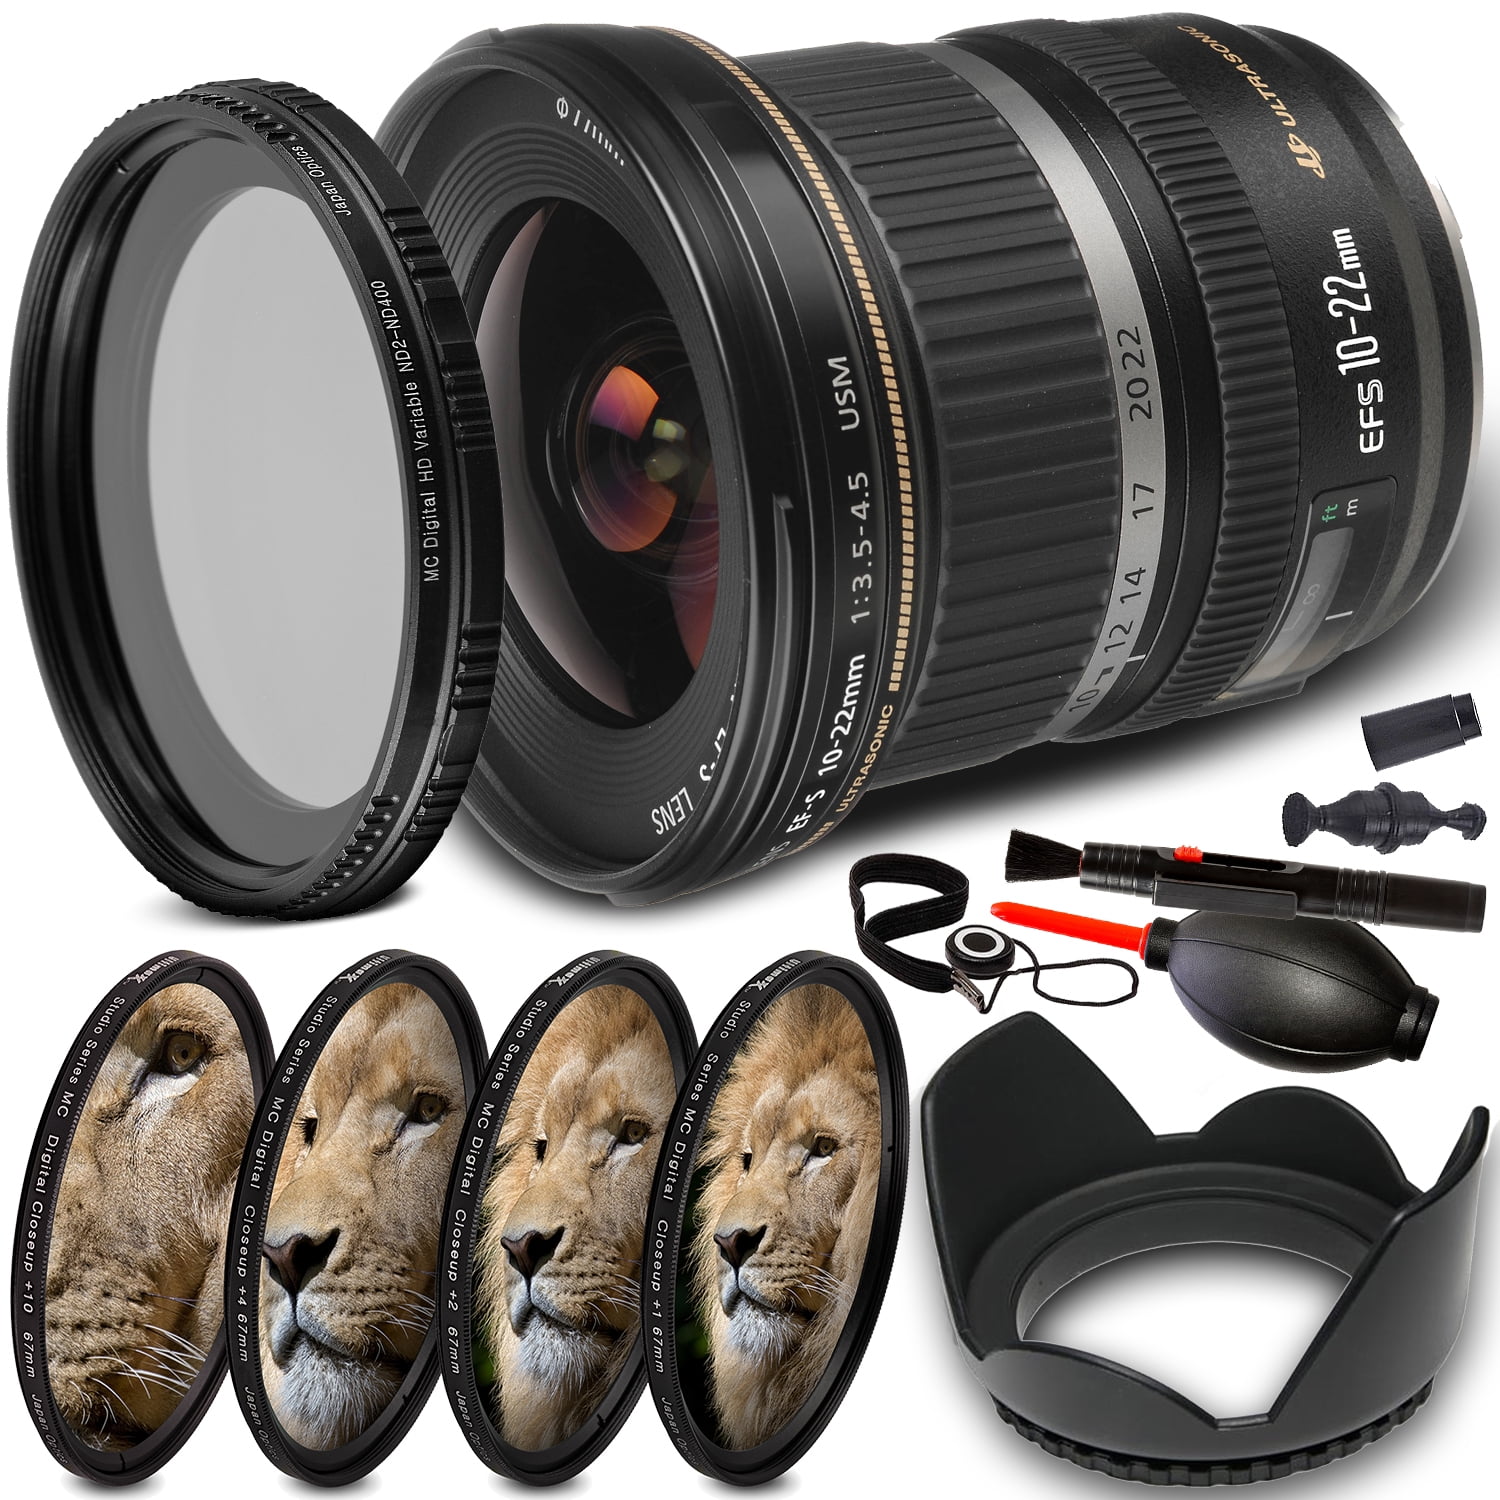 Canon EF-S 10-22mm f/3.5-4.5 USM Lens with Starter Accessory